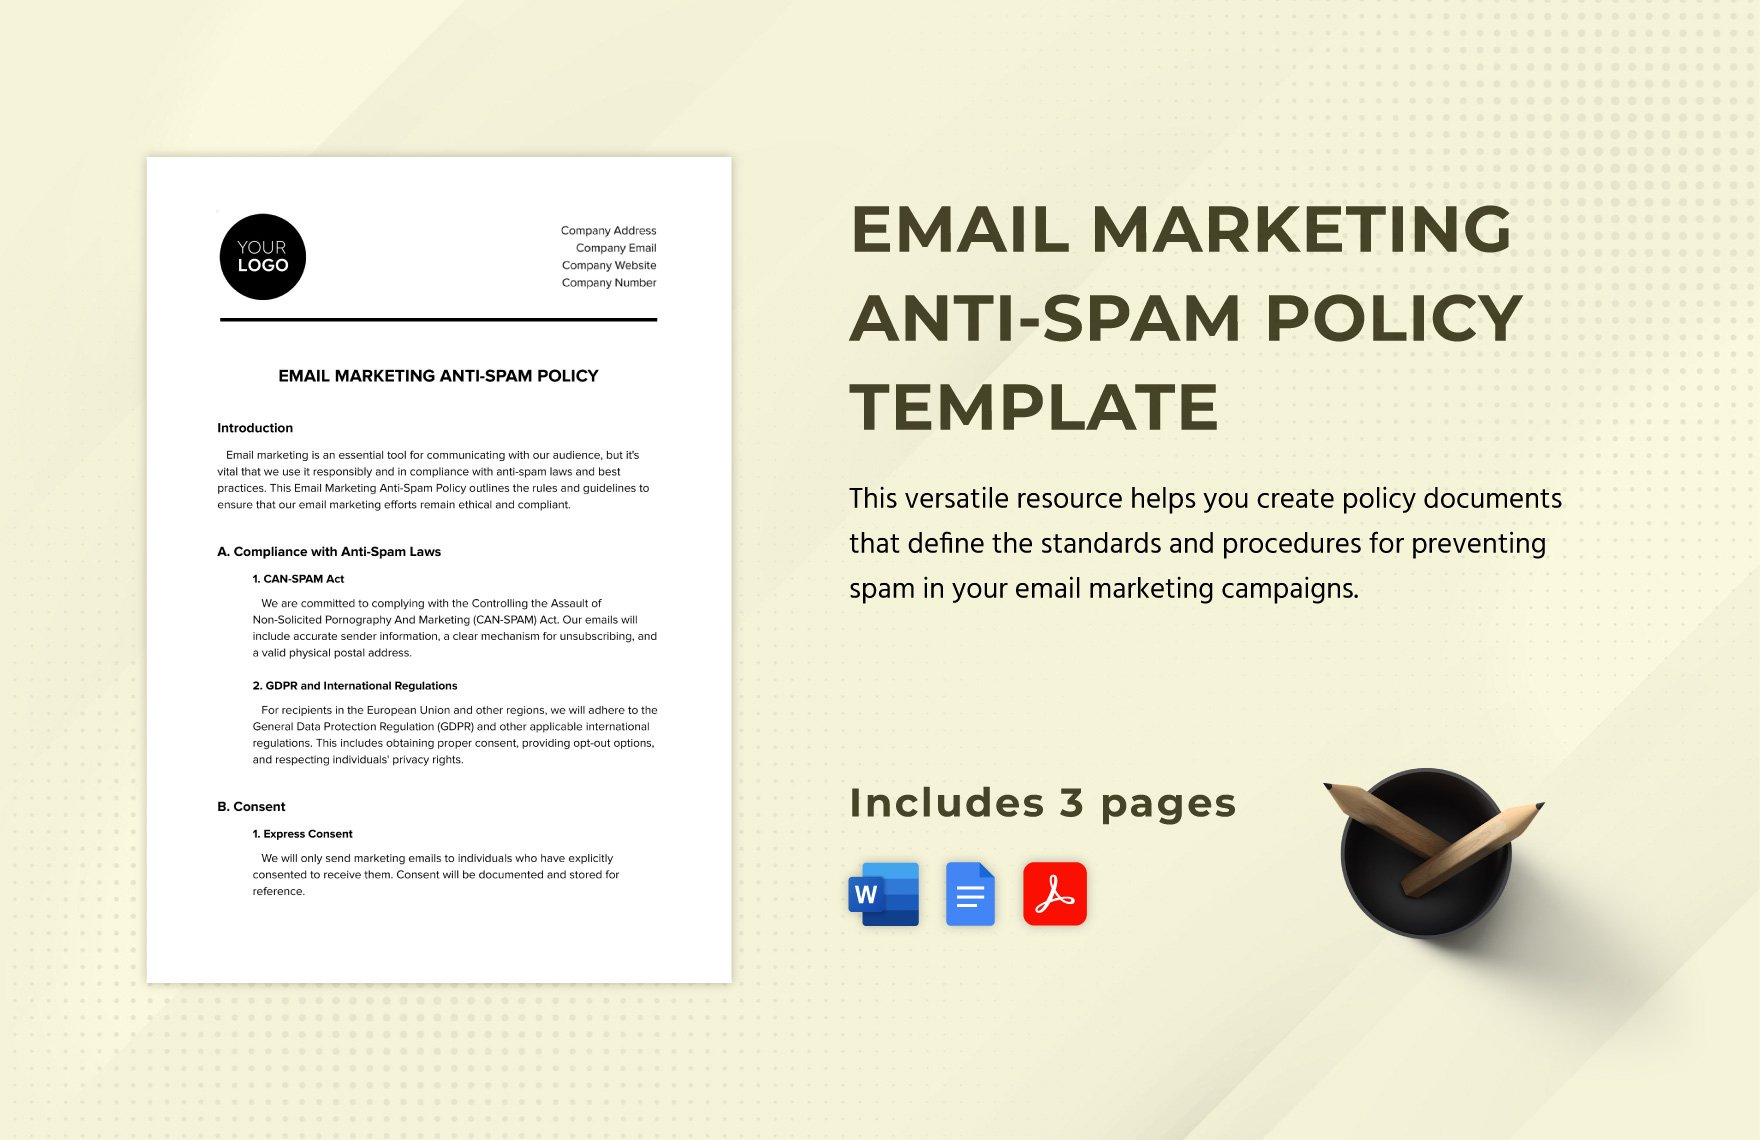 Email Marketing Anti-Spam Policy Template